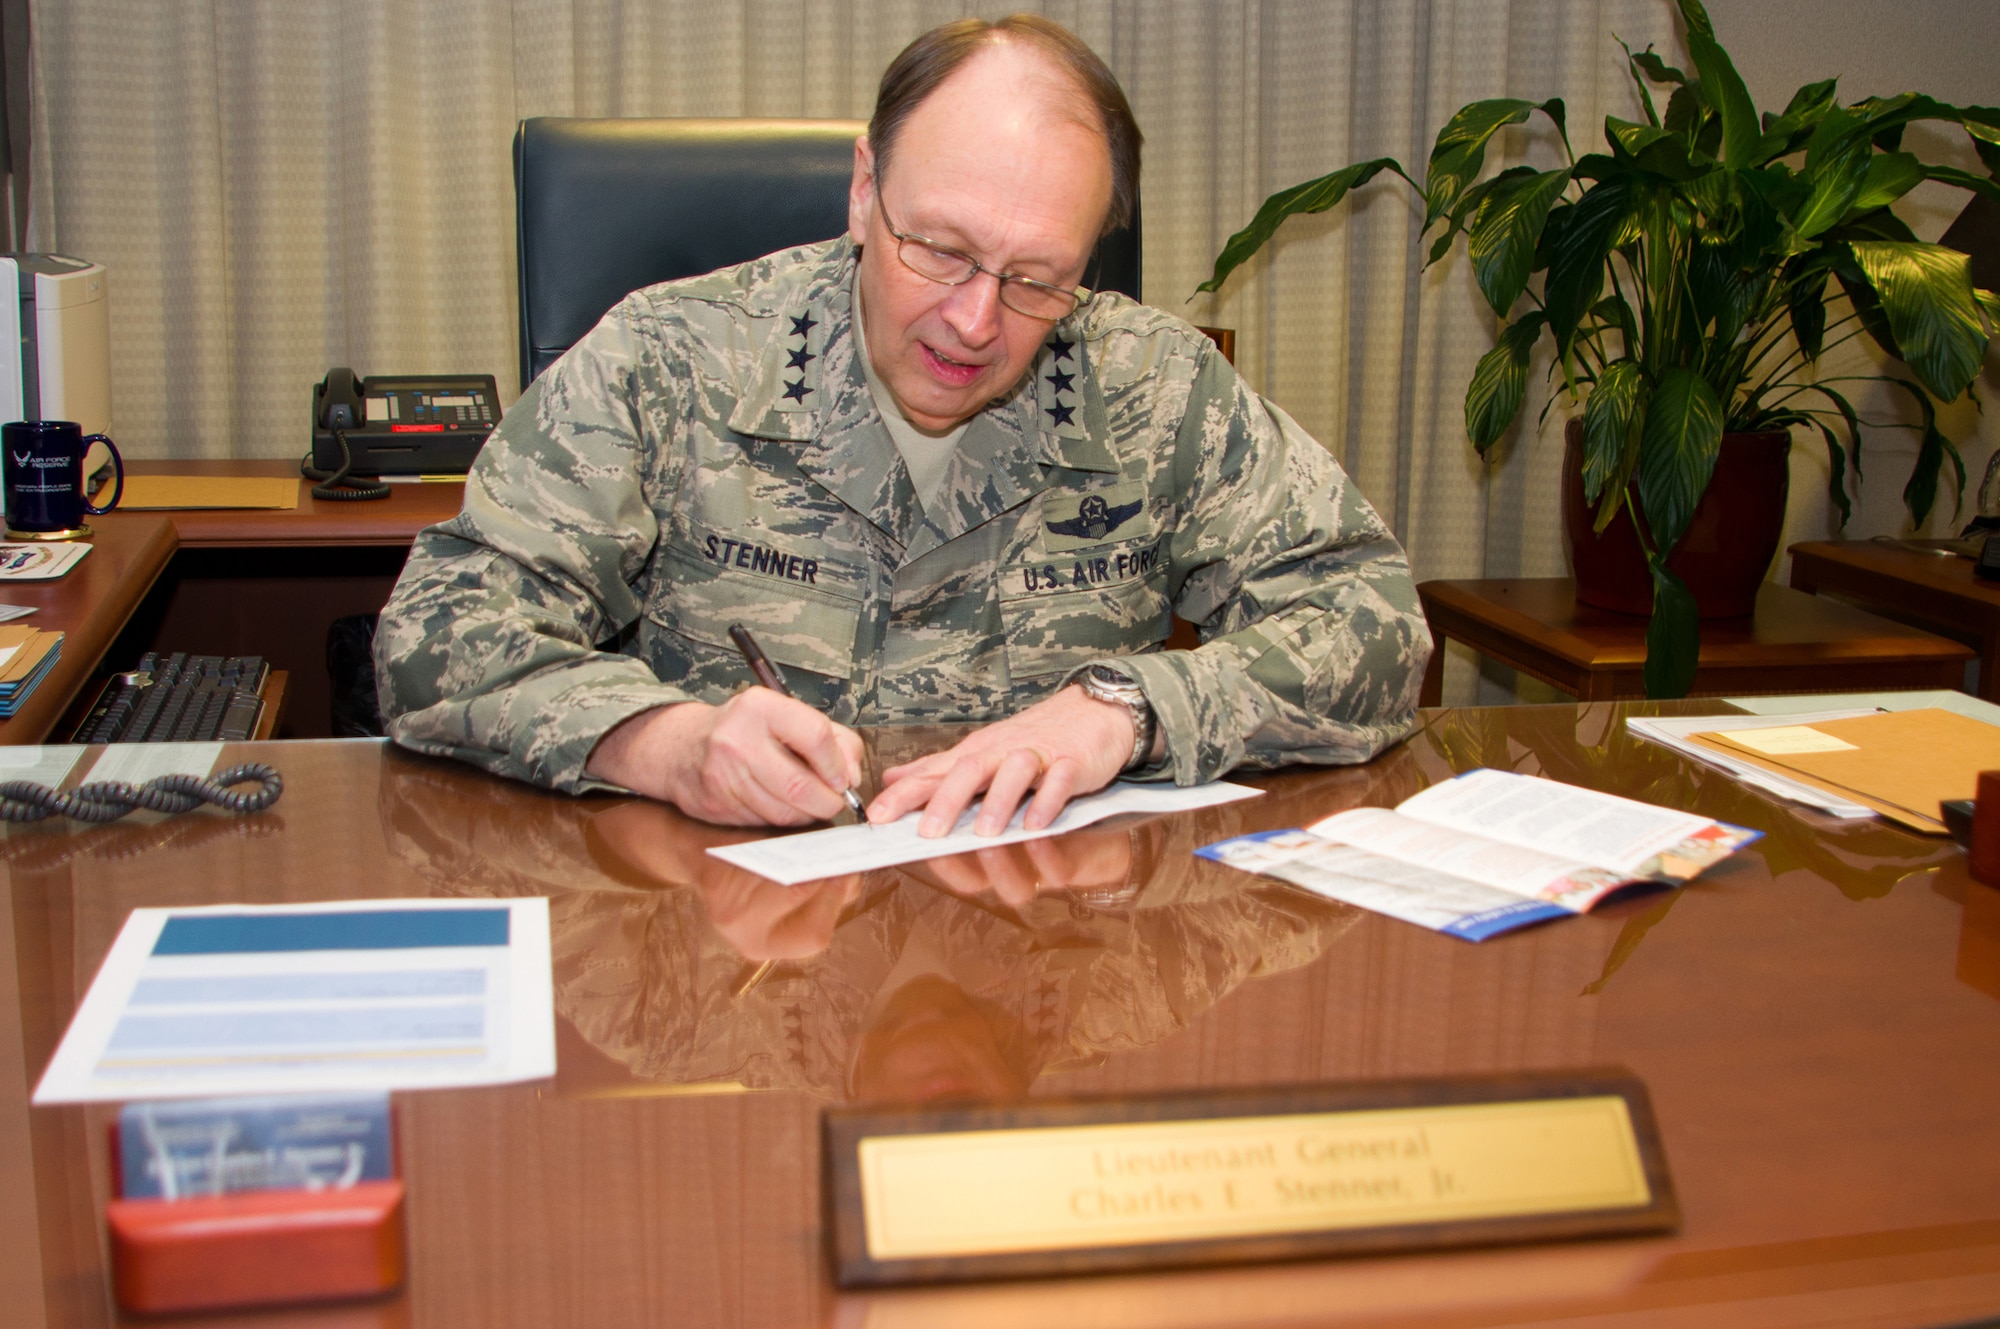 Lt. Gen. Charles E. Stenner, Jr., commander of Air Force Reserve Command, fills out his campaign pledge for the Air Force Assistance Fund. AFAF supports the Air Force Aid Society, the Air Force Enlisted Village, Air Force Village and the LeMay Foundation. The AFAF campaign ends March 18, 2011. (U.S. Air Force photo/Staff Sgt. Alexy Saltekoff)